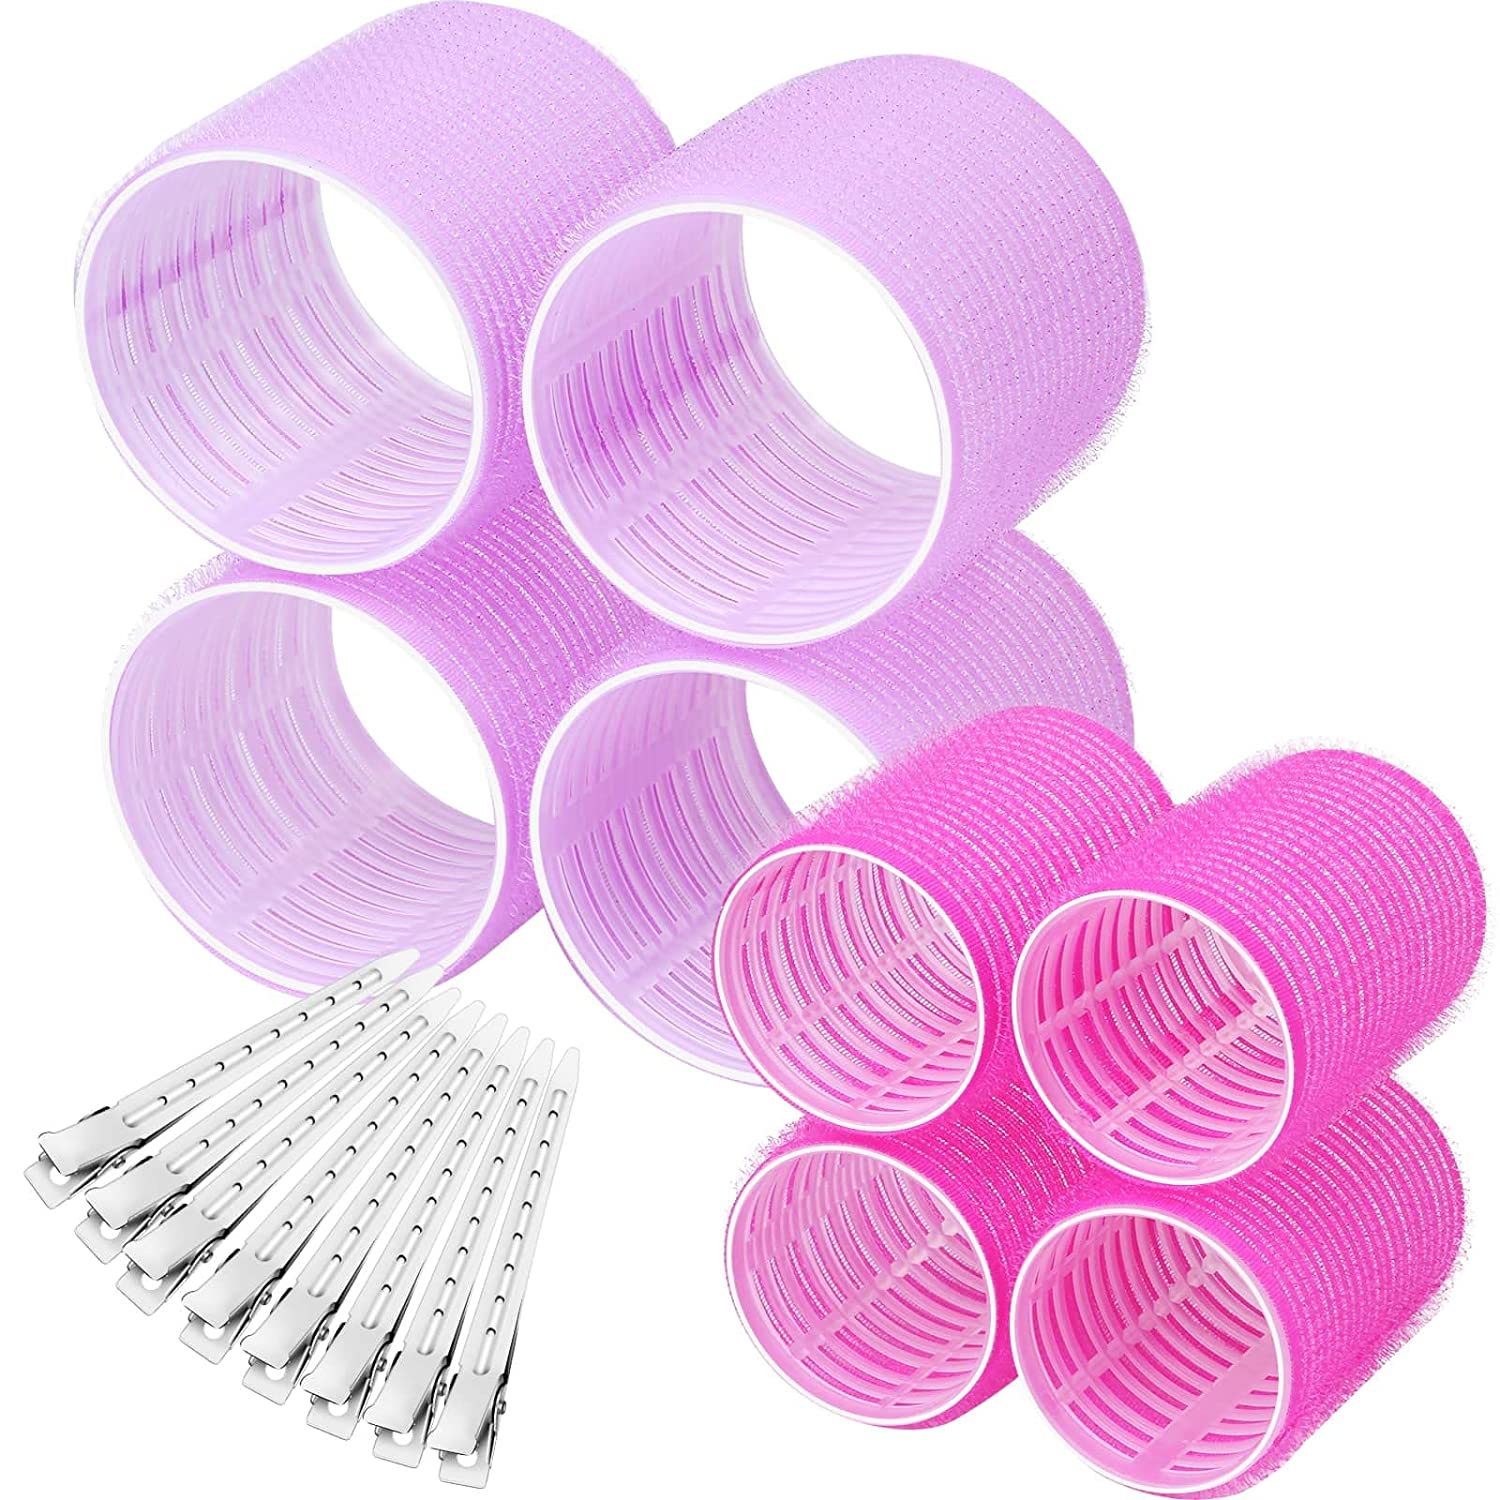 shynek Hair Rollers Self Adhesive 16 Pieces Set of 8 Heat Resistant Curlers 2 Sises (4 Jumbo and 4 Large) and 8 Hair Clips for Long, Medium, Short, Thick, Fine, Thin Hair, ‎pink